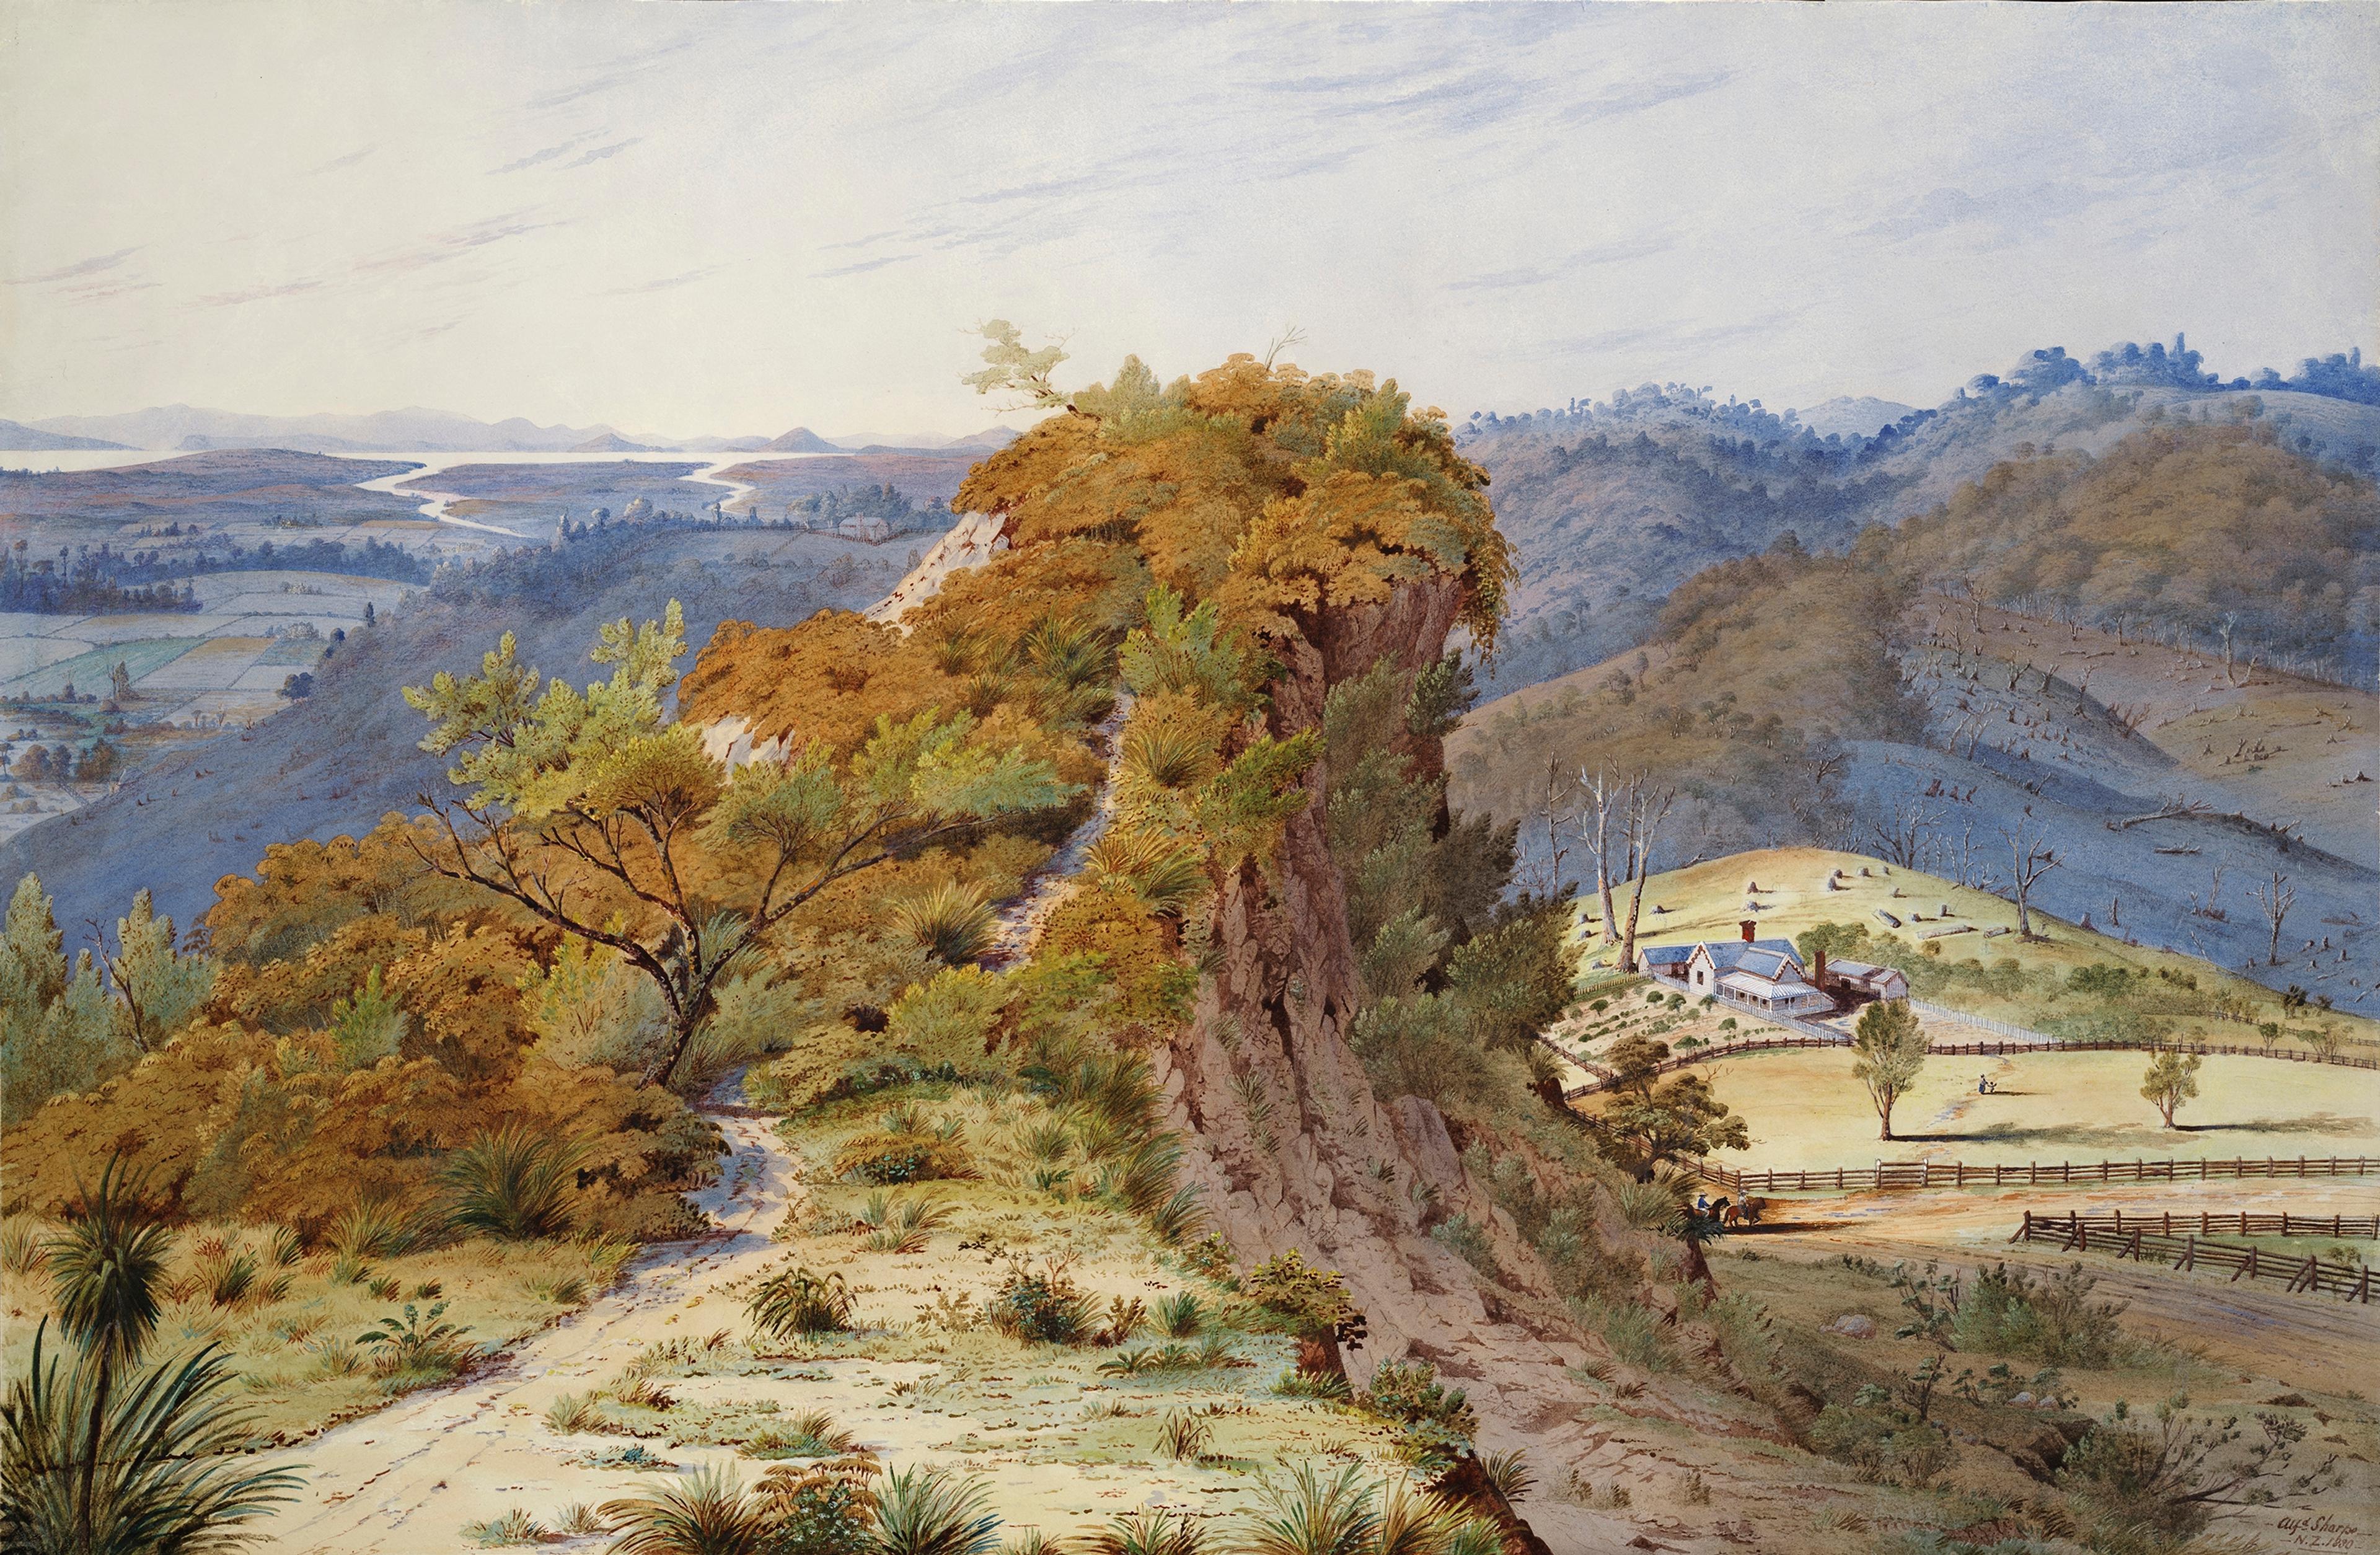 Image of Alfred Sharpe's watercolour painting titled 'View of the Rock of Maketū, near Drury, NZ', painted in 1880